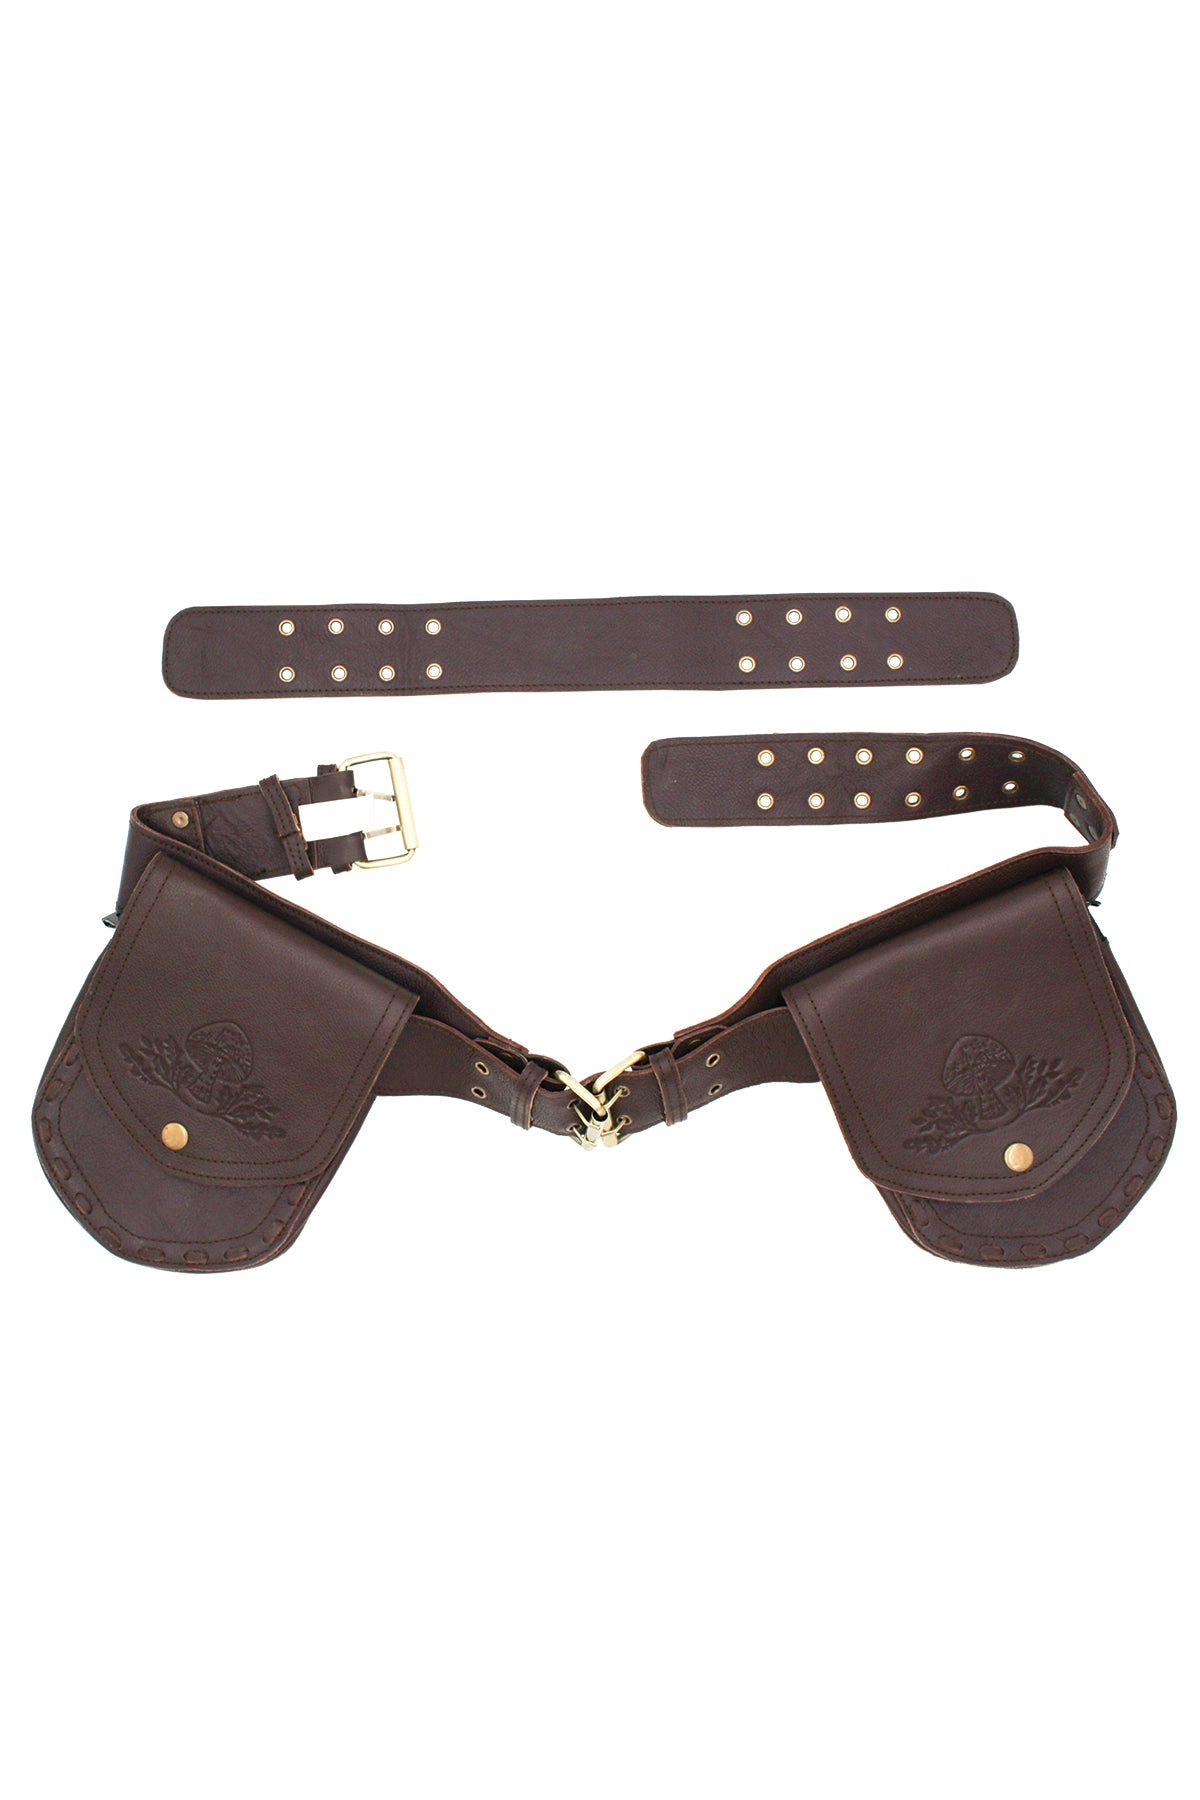 Stamped Leather Utility Belt